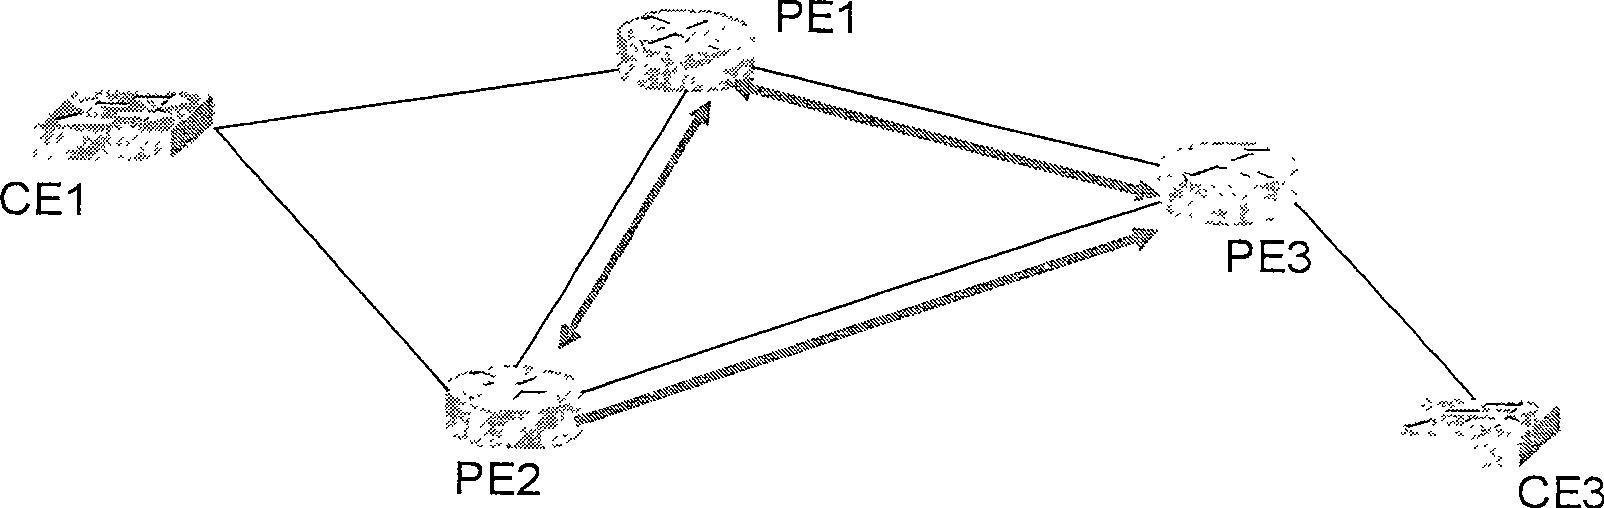 Double-attach/multi-attach logical packet network method and supplier equipment